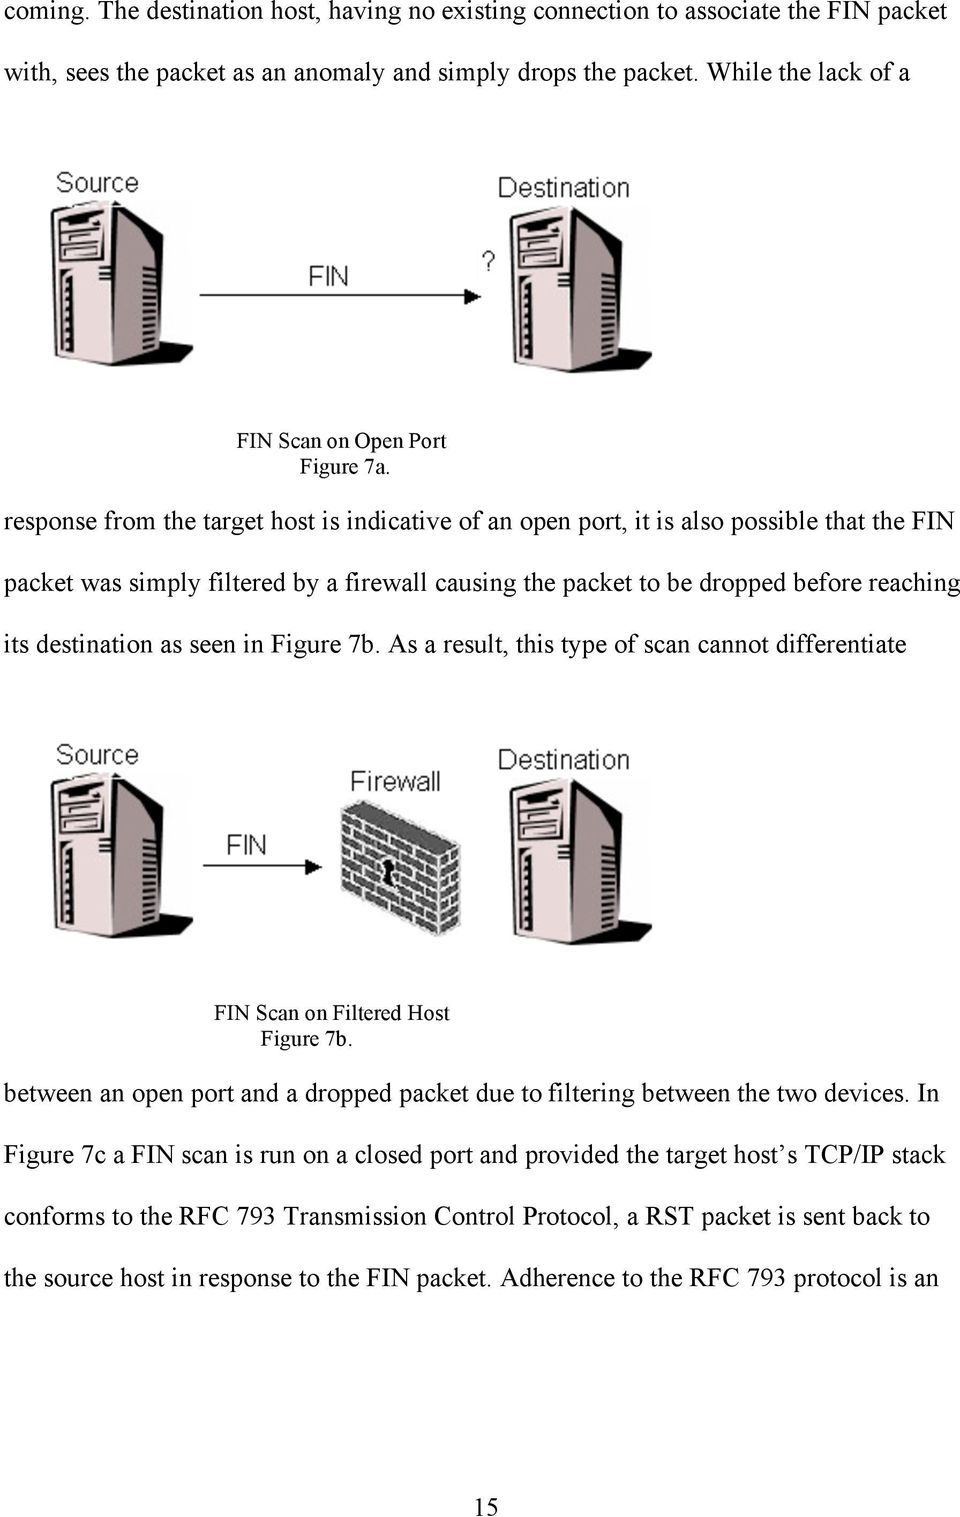 response from the target host is indicative of an open port, it is also possible that the FIN packet was simply filtered by a firewall causing the packet to be dropped before reaching its destination